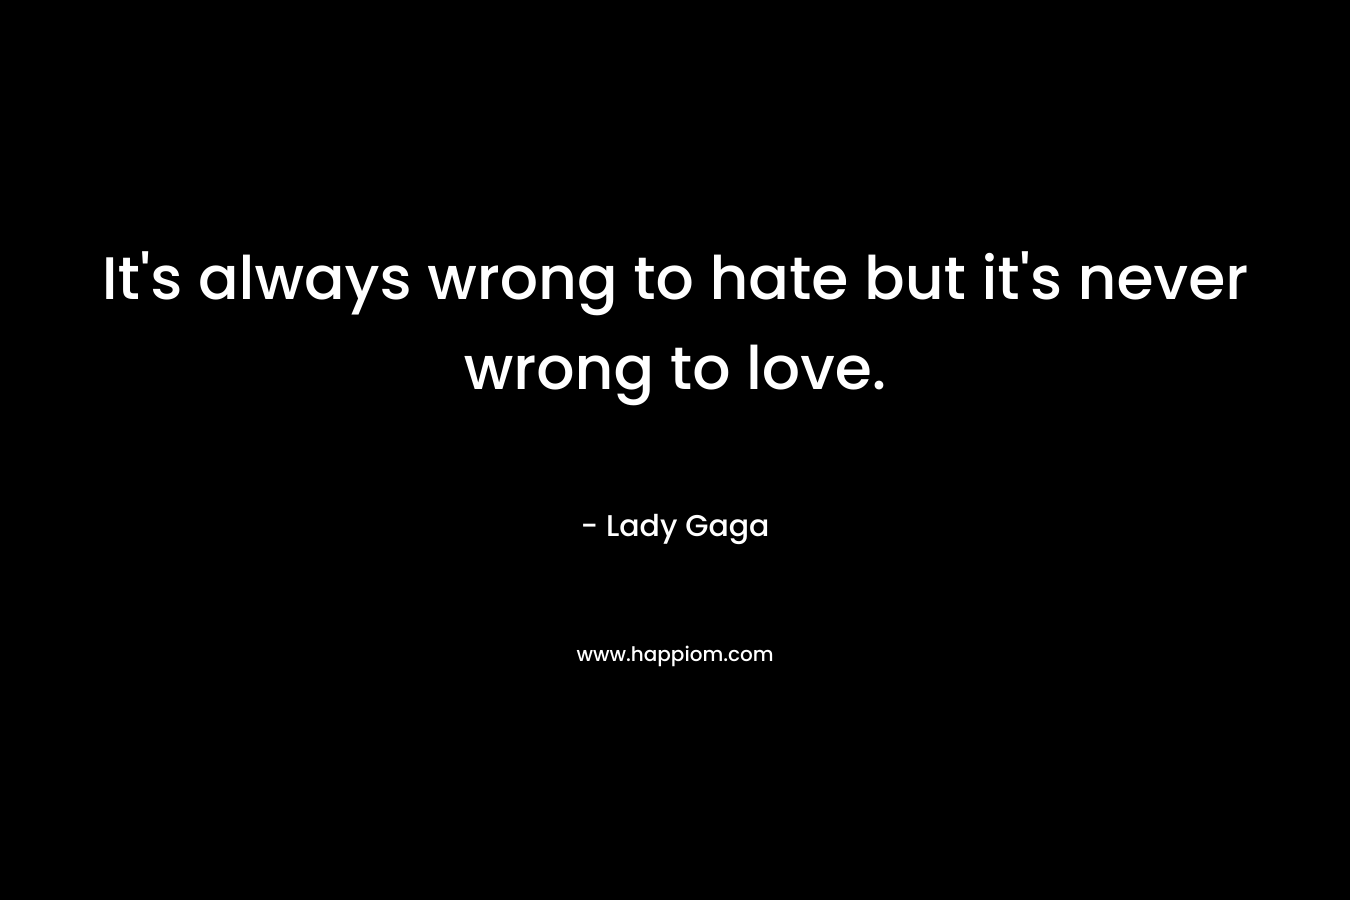 It's always wrong to hate but it's never wrong to love.